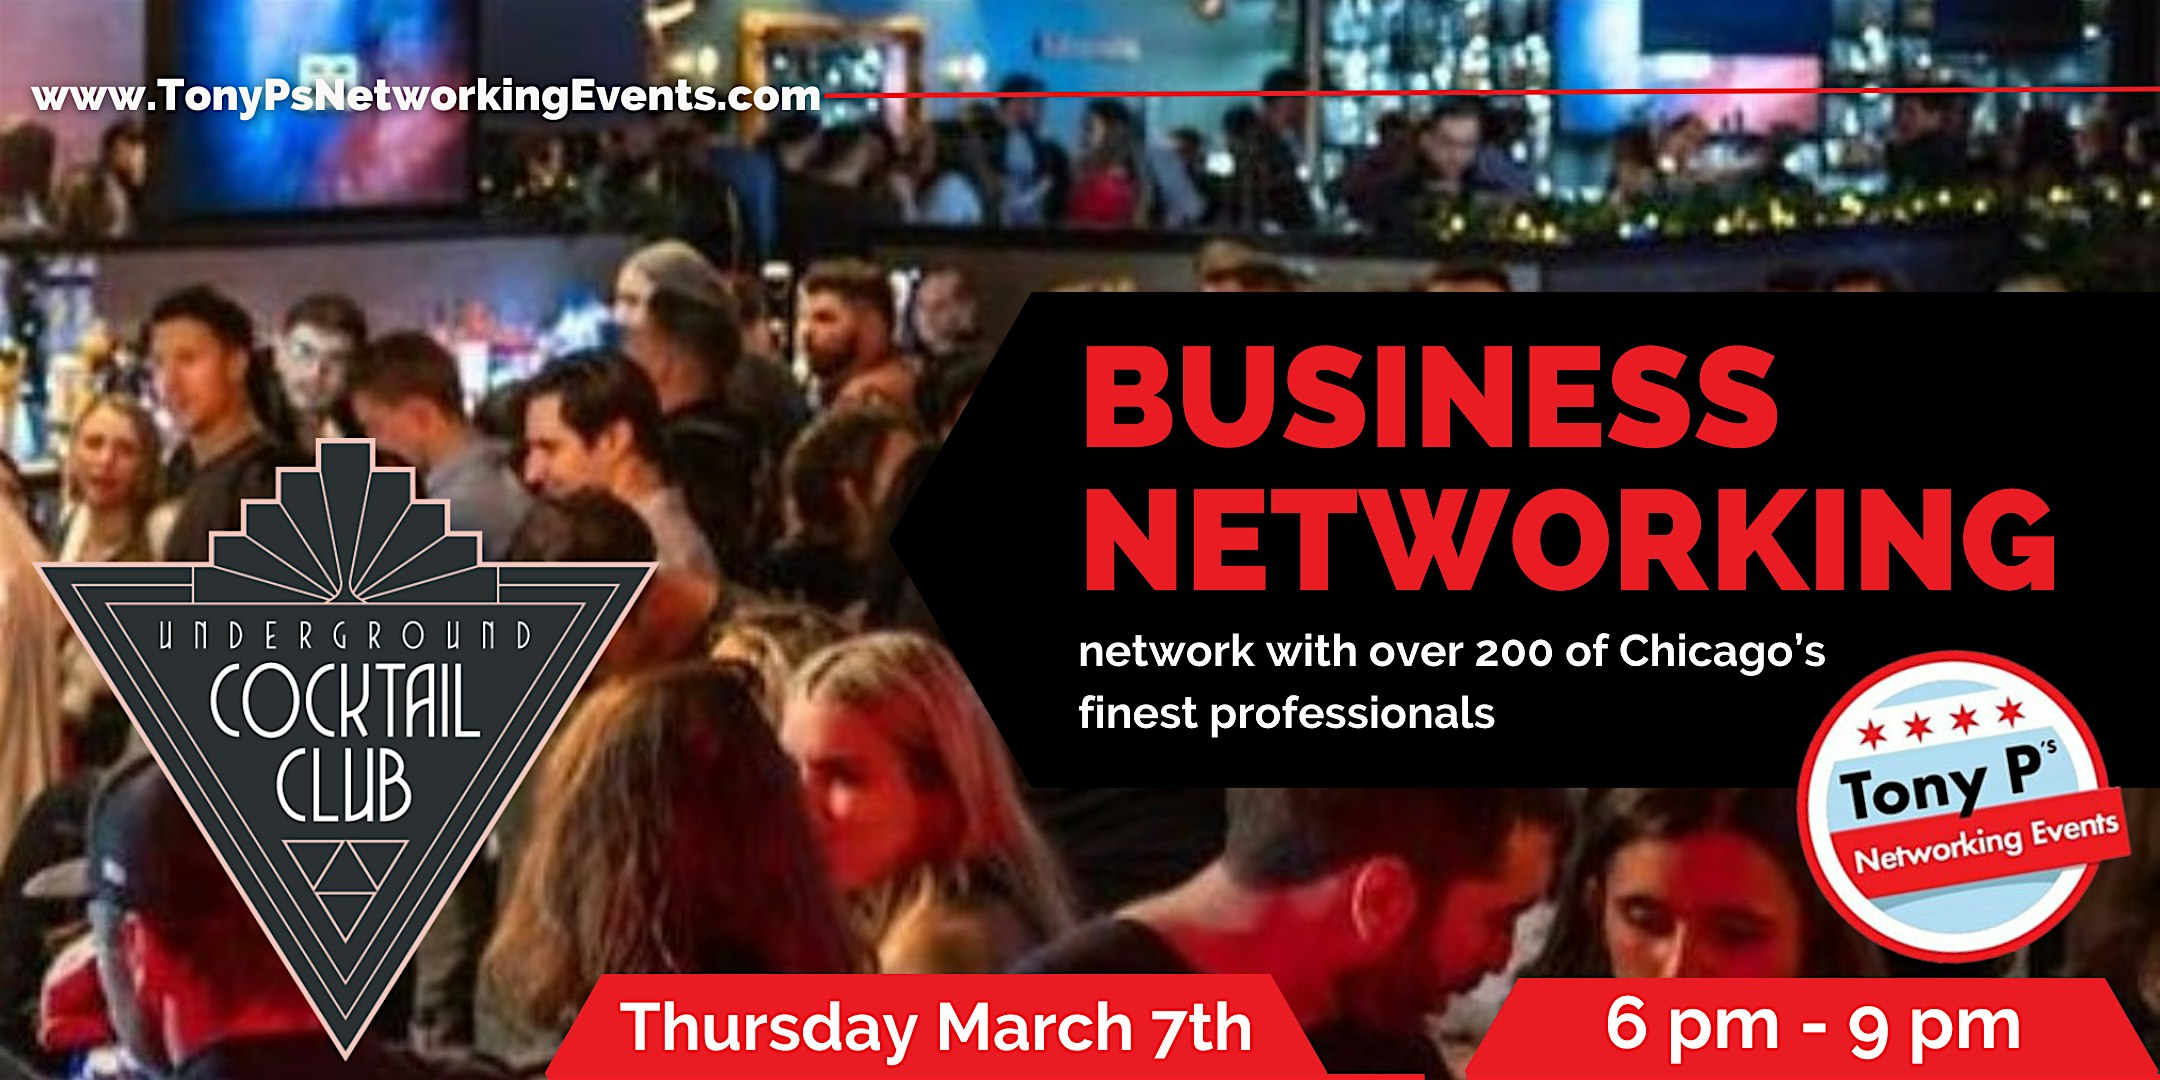 Tony P’s March Business Networking Event at Underground: Thursday March 7th